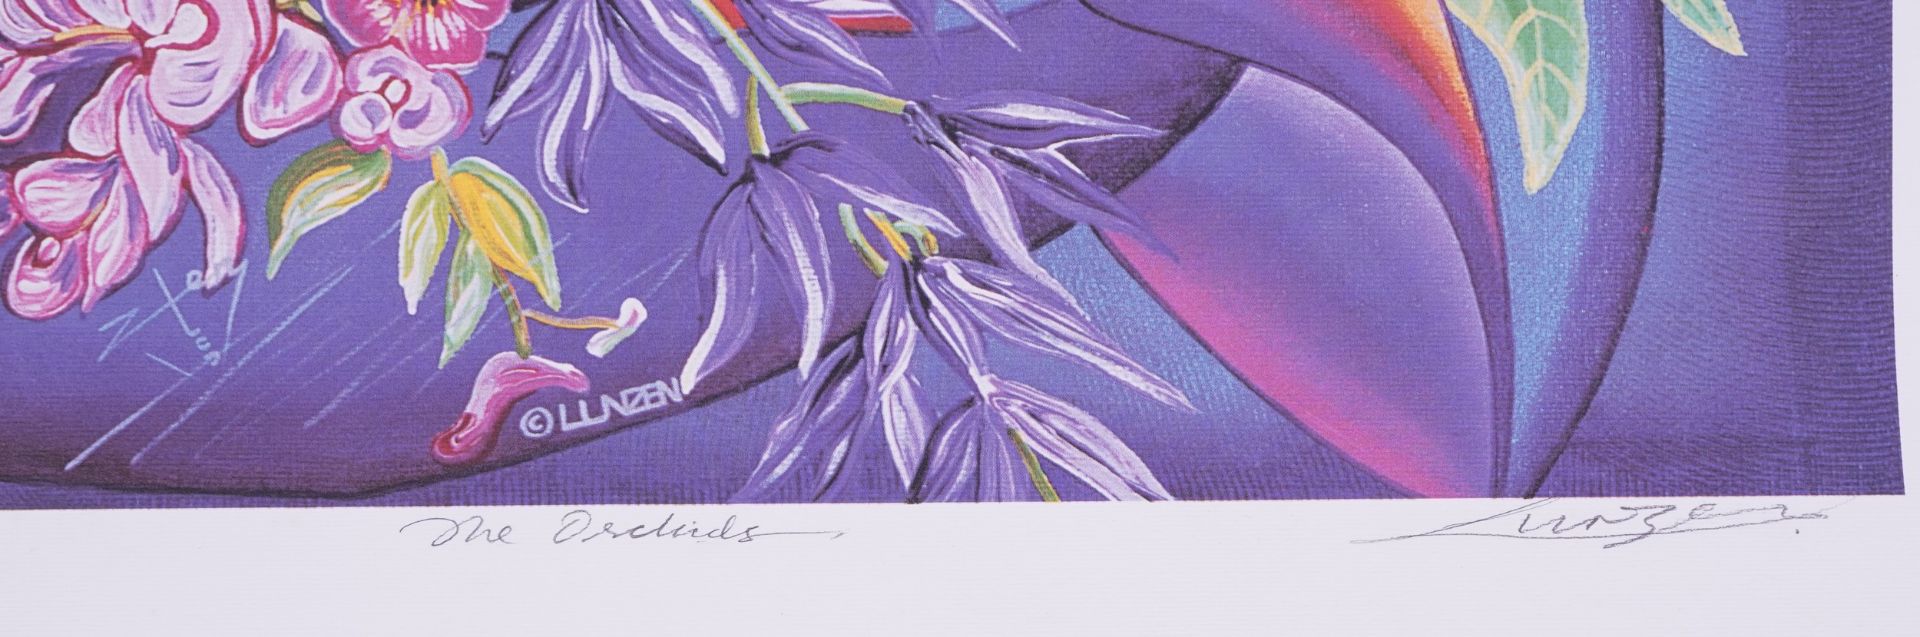 Lunzen - The Orchids, Magic Dreams, The Butterflies and Love Story, set of four pencil signed silk - Image 9 of 19